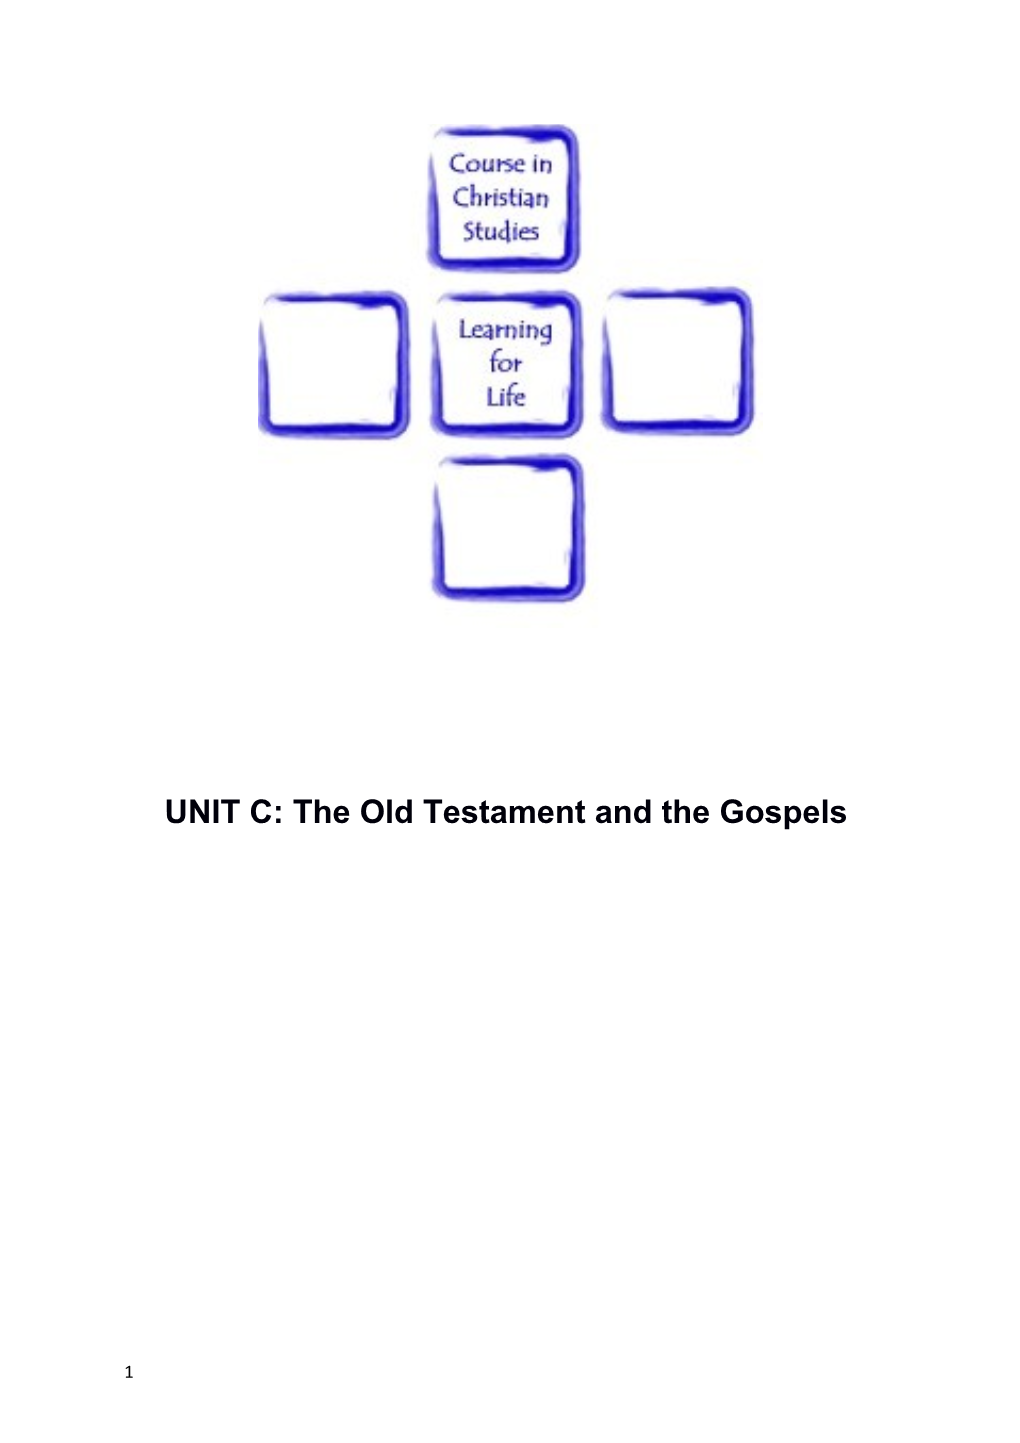 UNIT C: the Old Testament and the Gospels